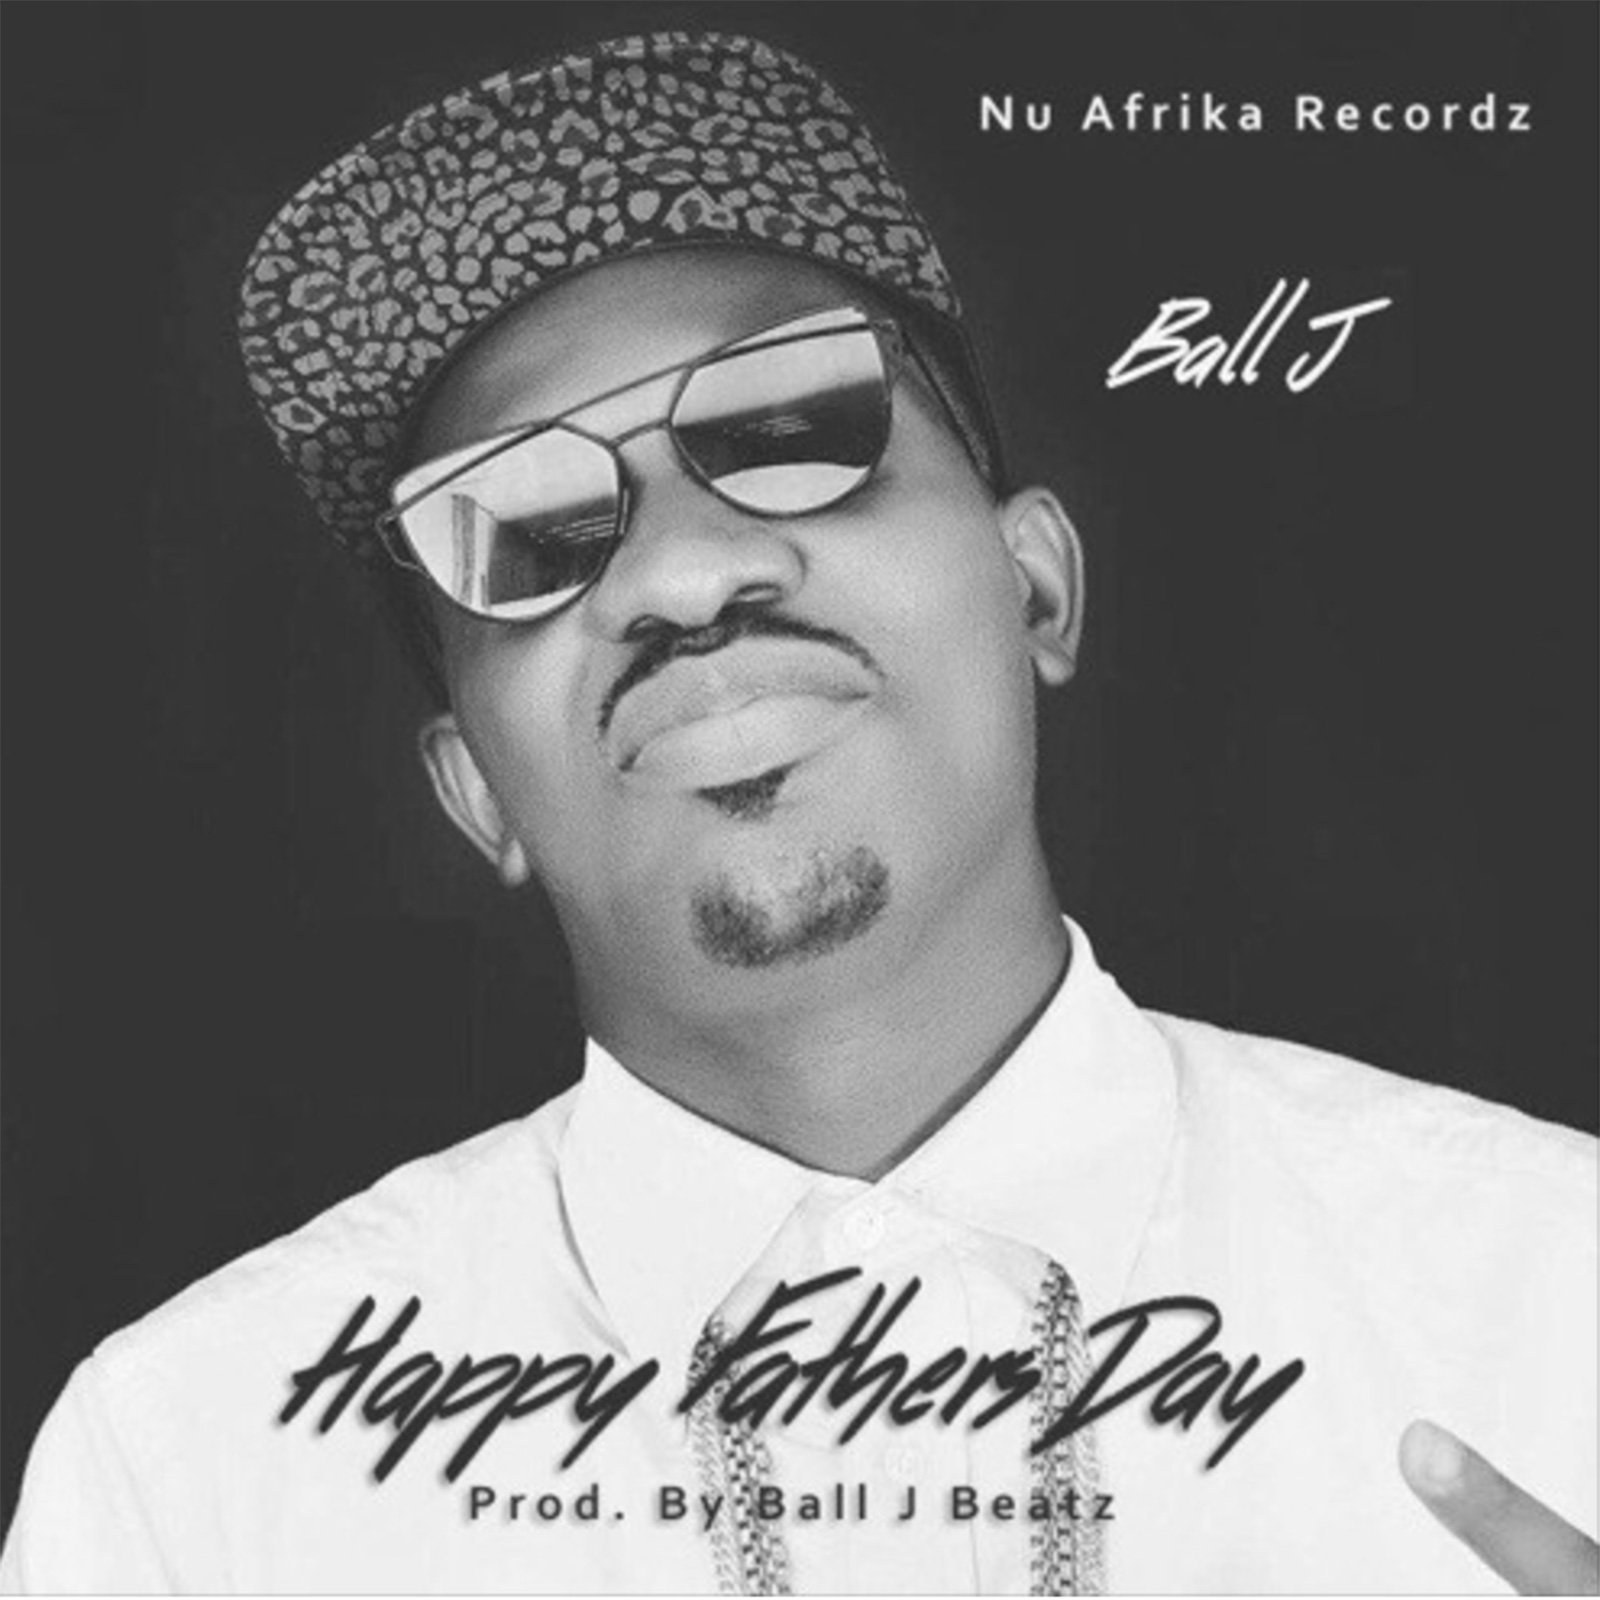 Happy Fathers Day by Ball J